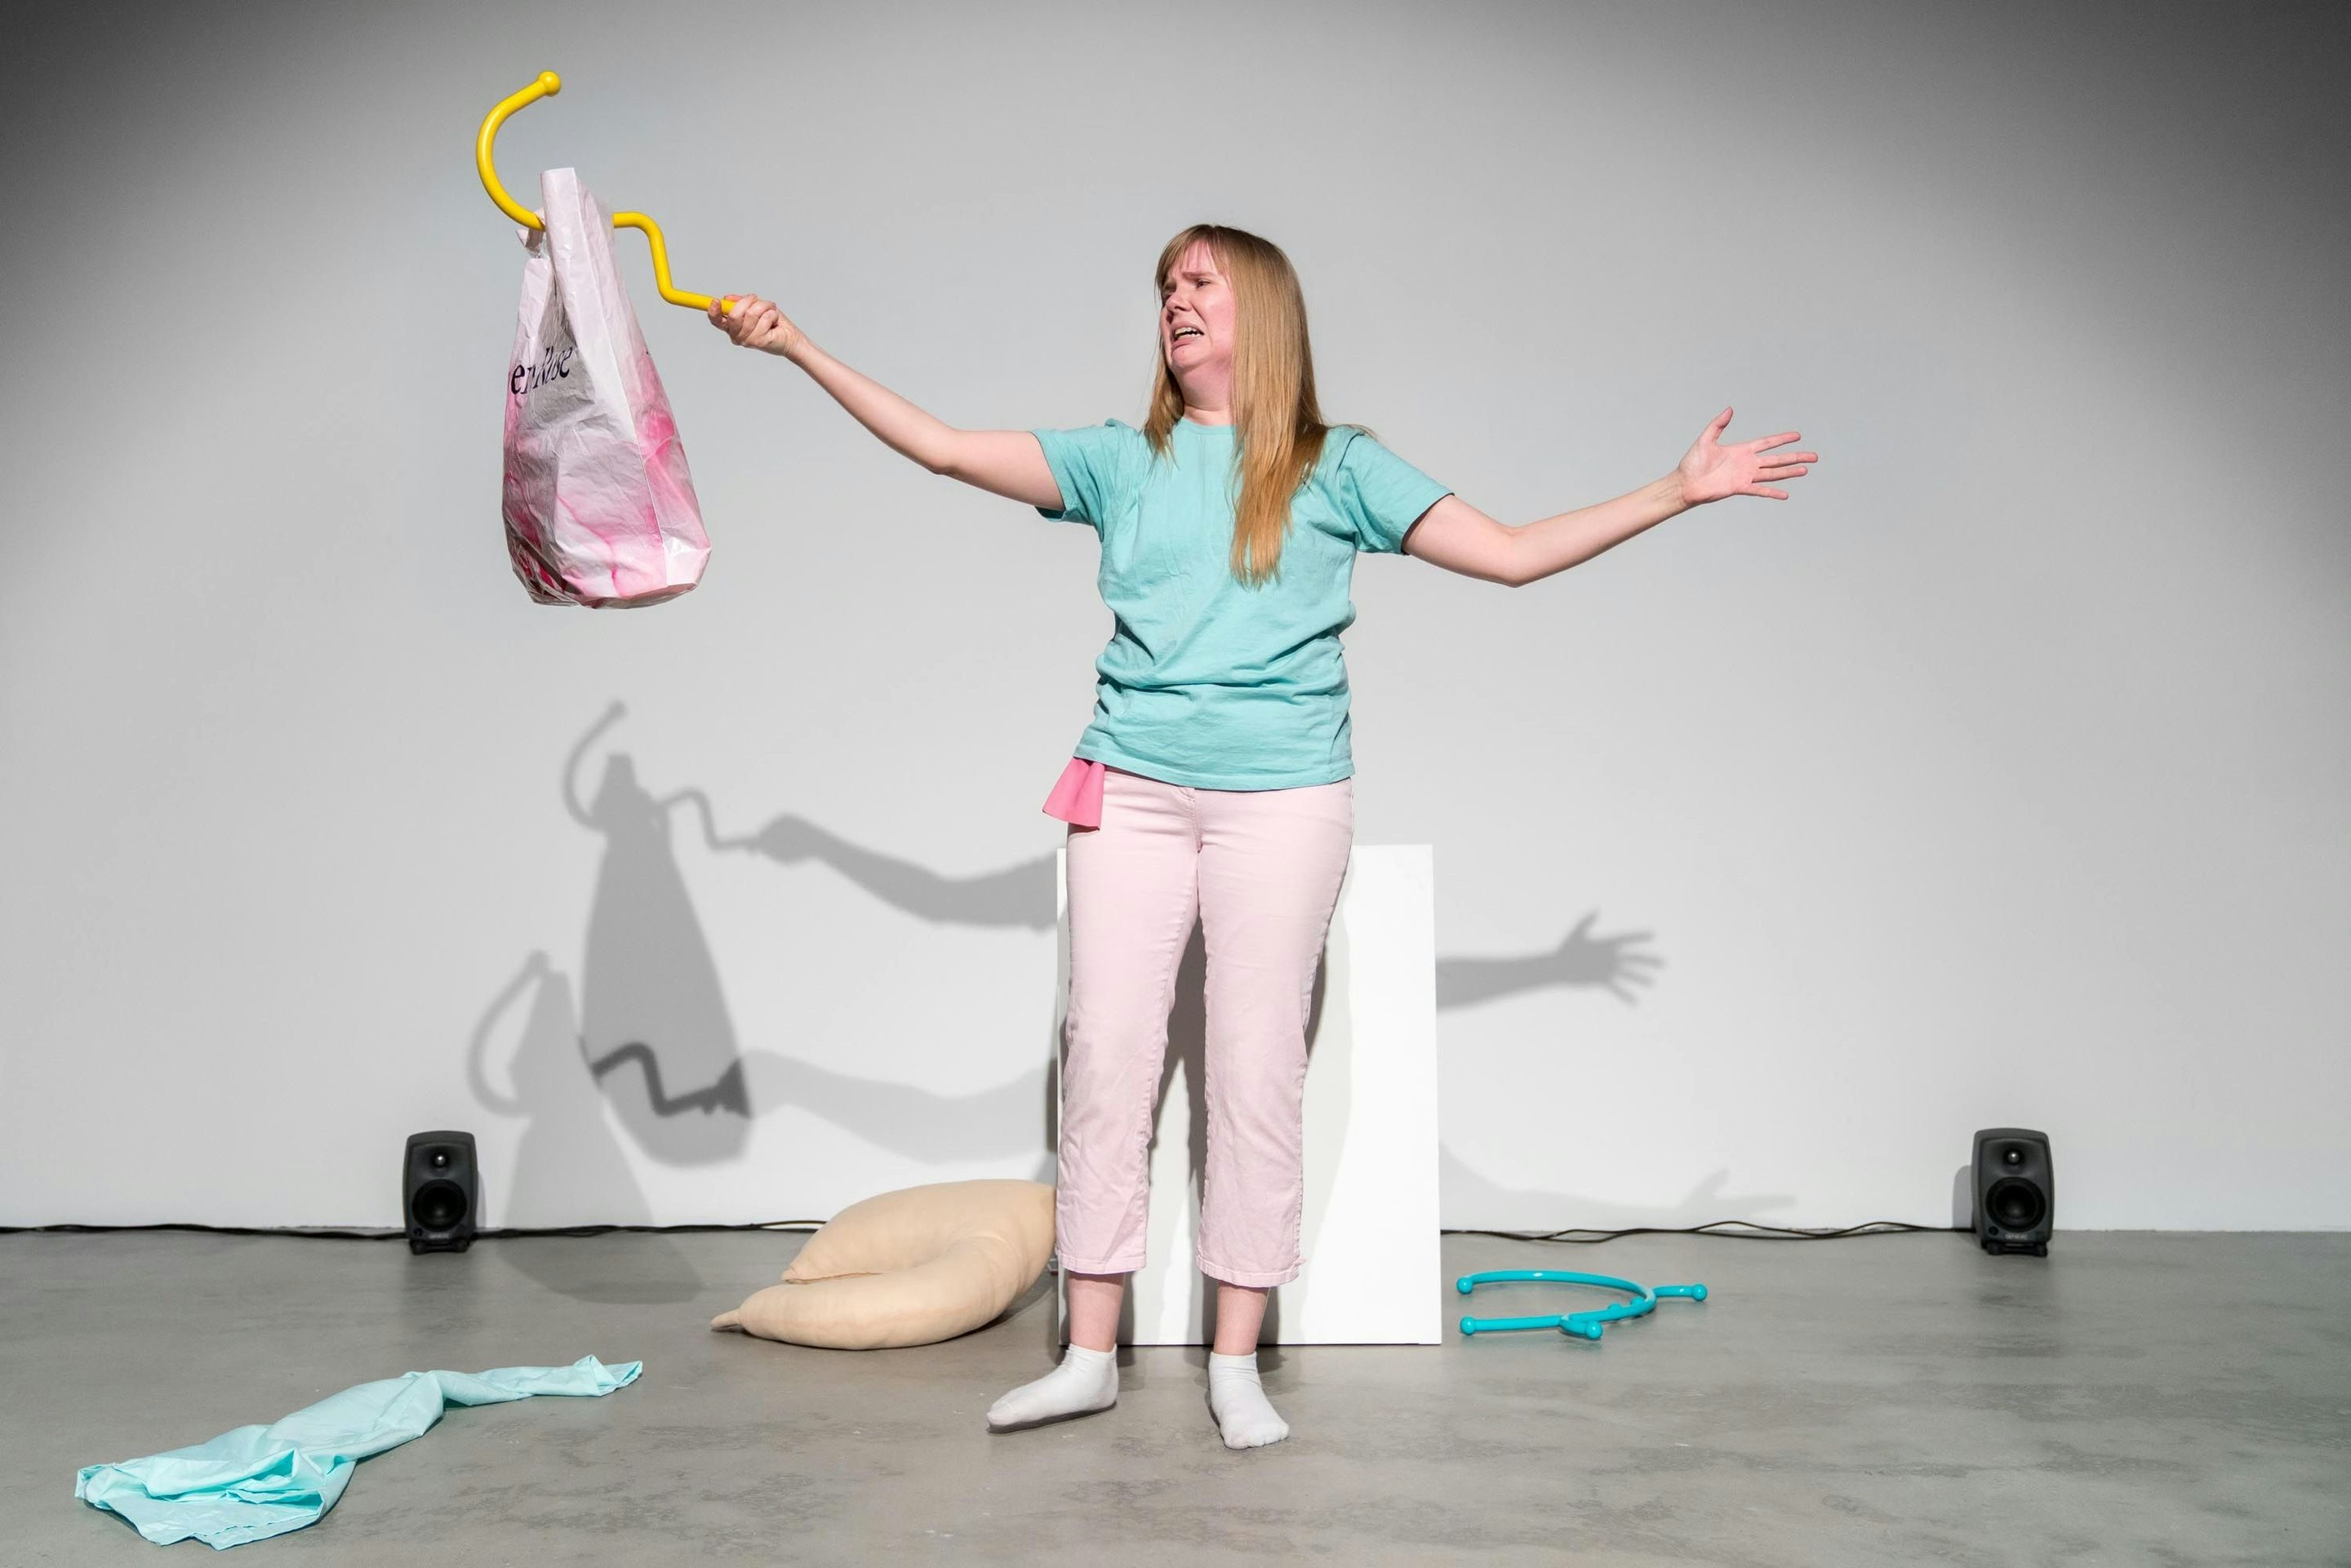 Performance of Bridget Moser at MOMENTA. The Life of Things, 2019.